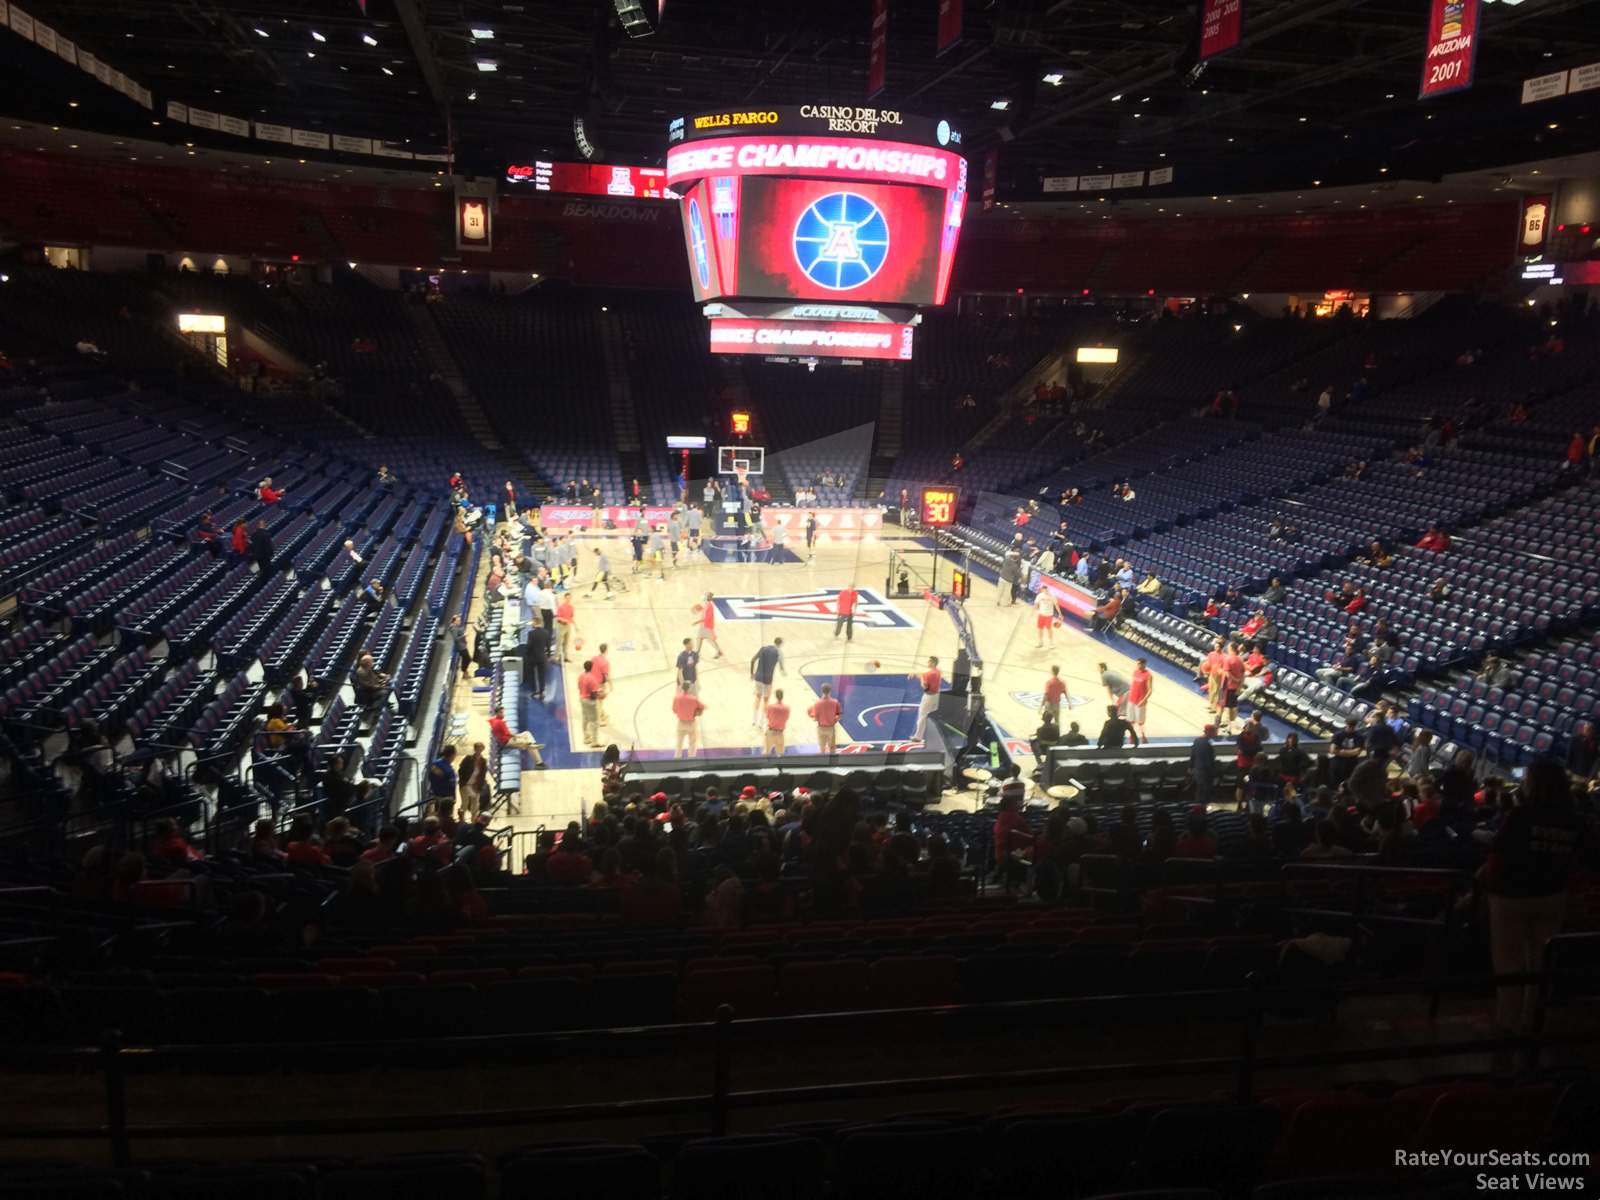 section 22, row 23 seat view  - mckale center